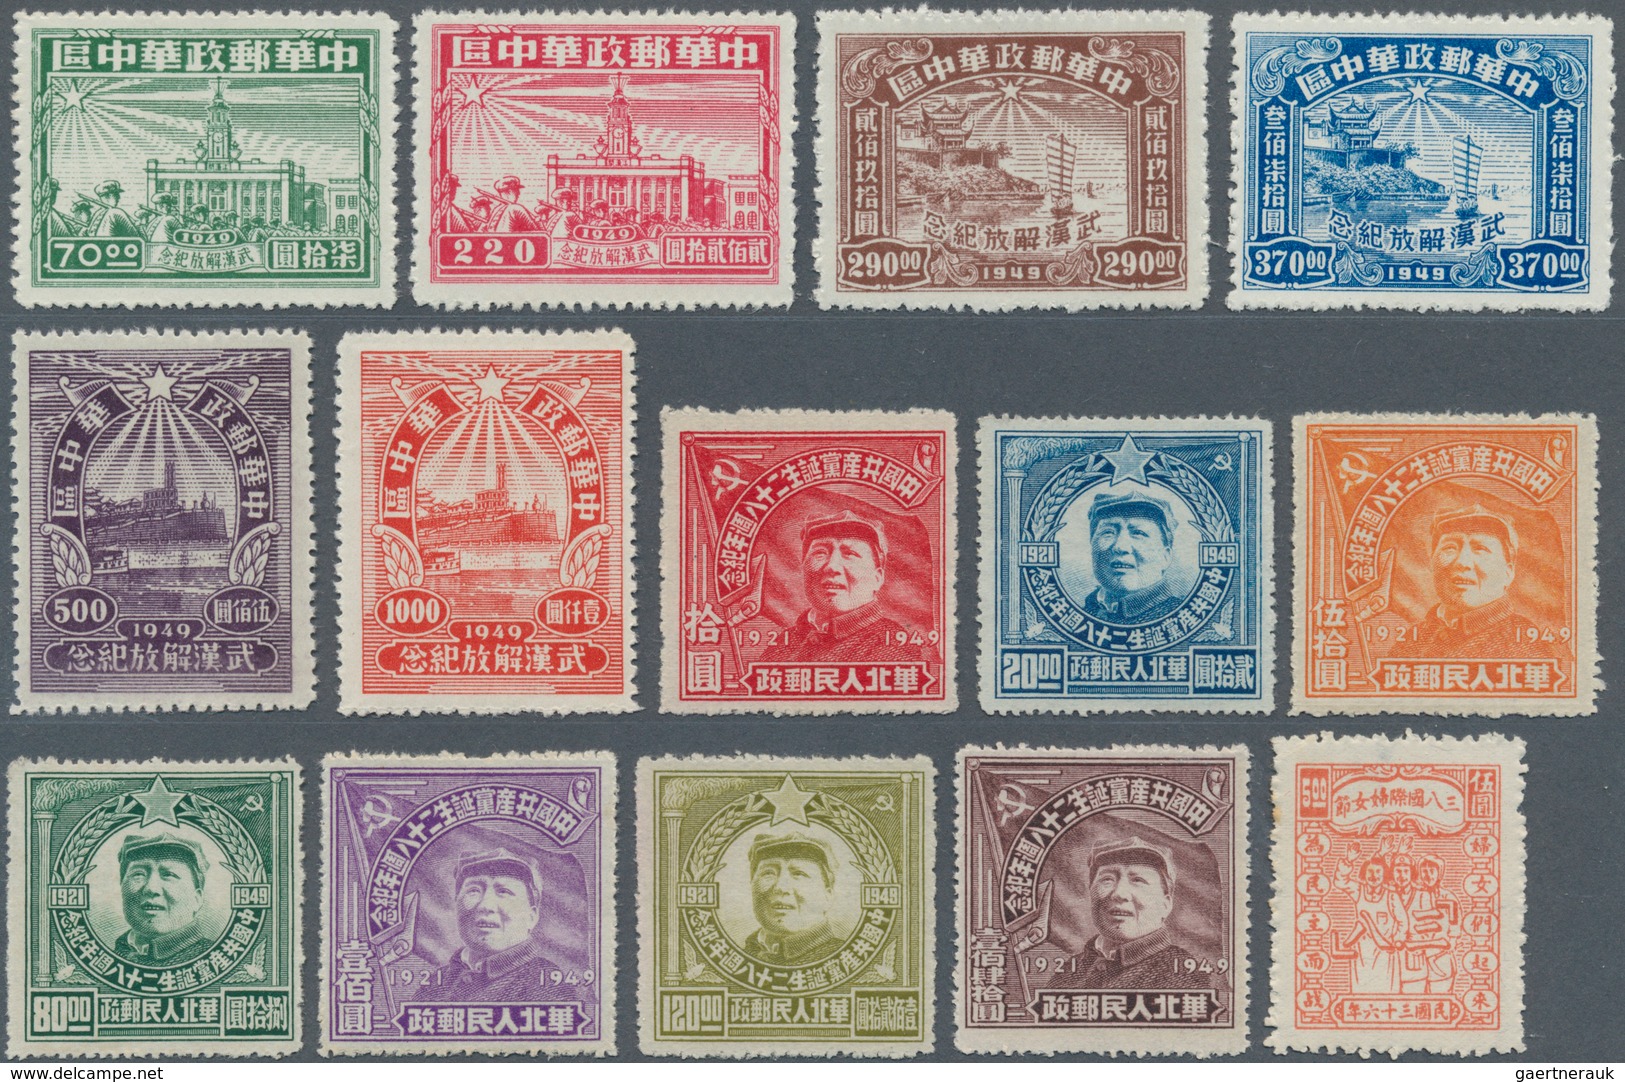 China - Volksrepublik - Provinzen: 1945/49, PRC provinces / liberated areas mounted on self-made pag